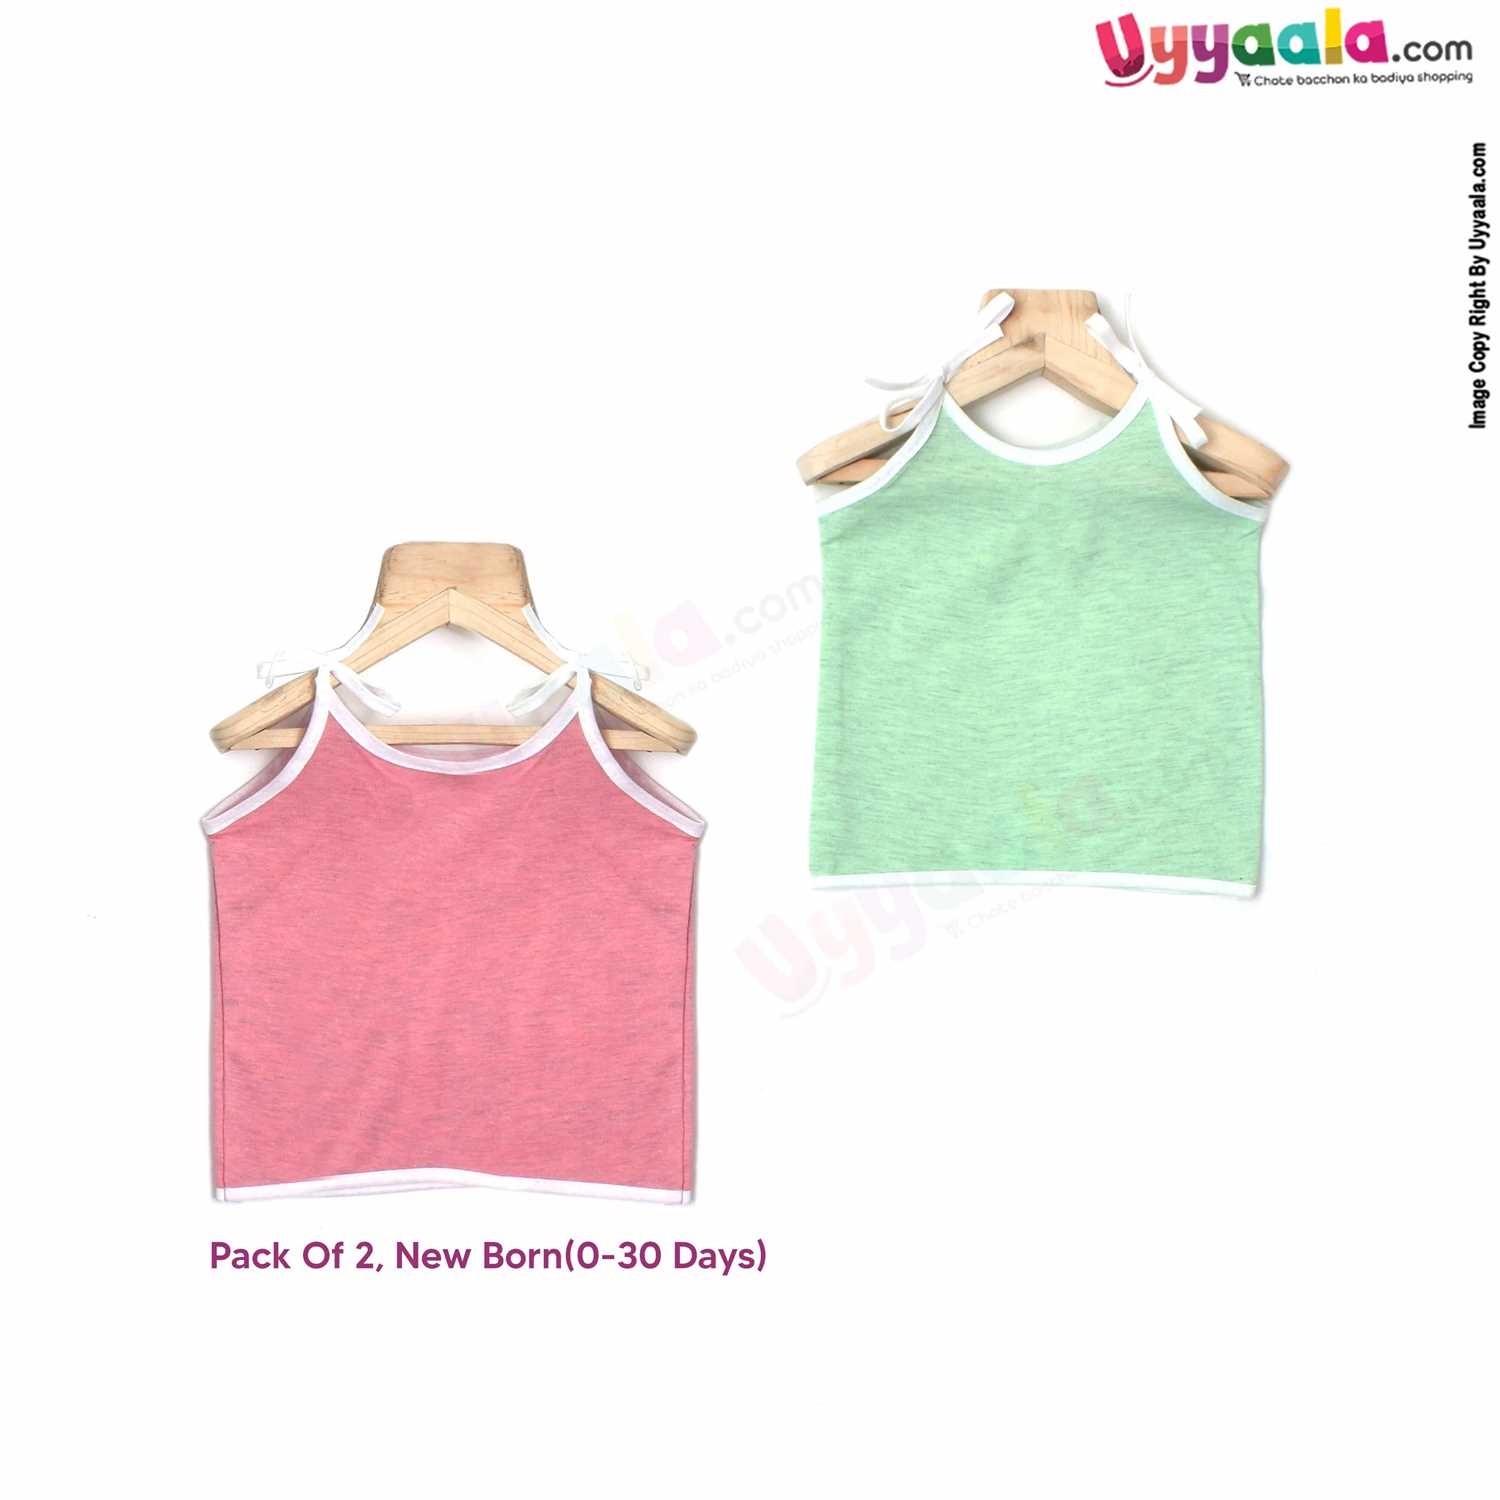 SNUG UP Sleeveless Baby Jabla Set, Top Opening Tie knot Lace Model, Premium Quality Cotton Baby Wear, (0-30 Days), 2Pack - Pink & Green